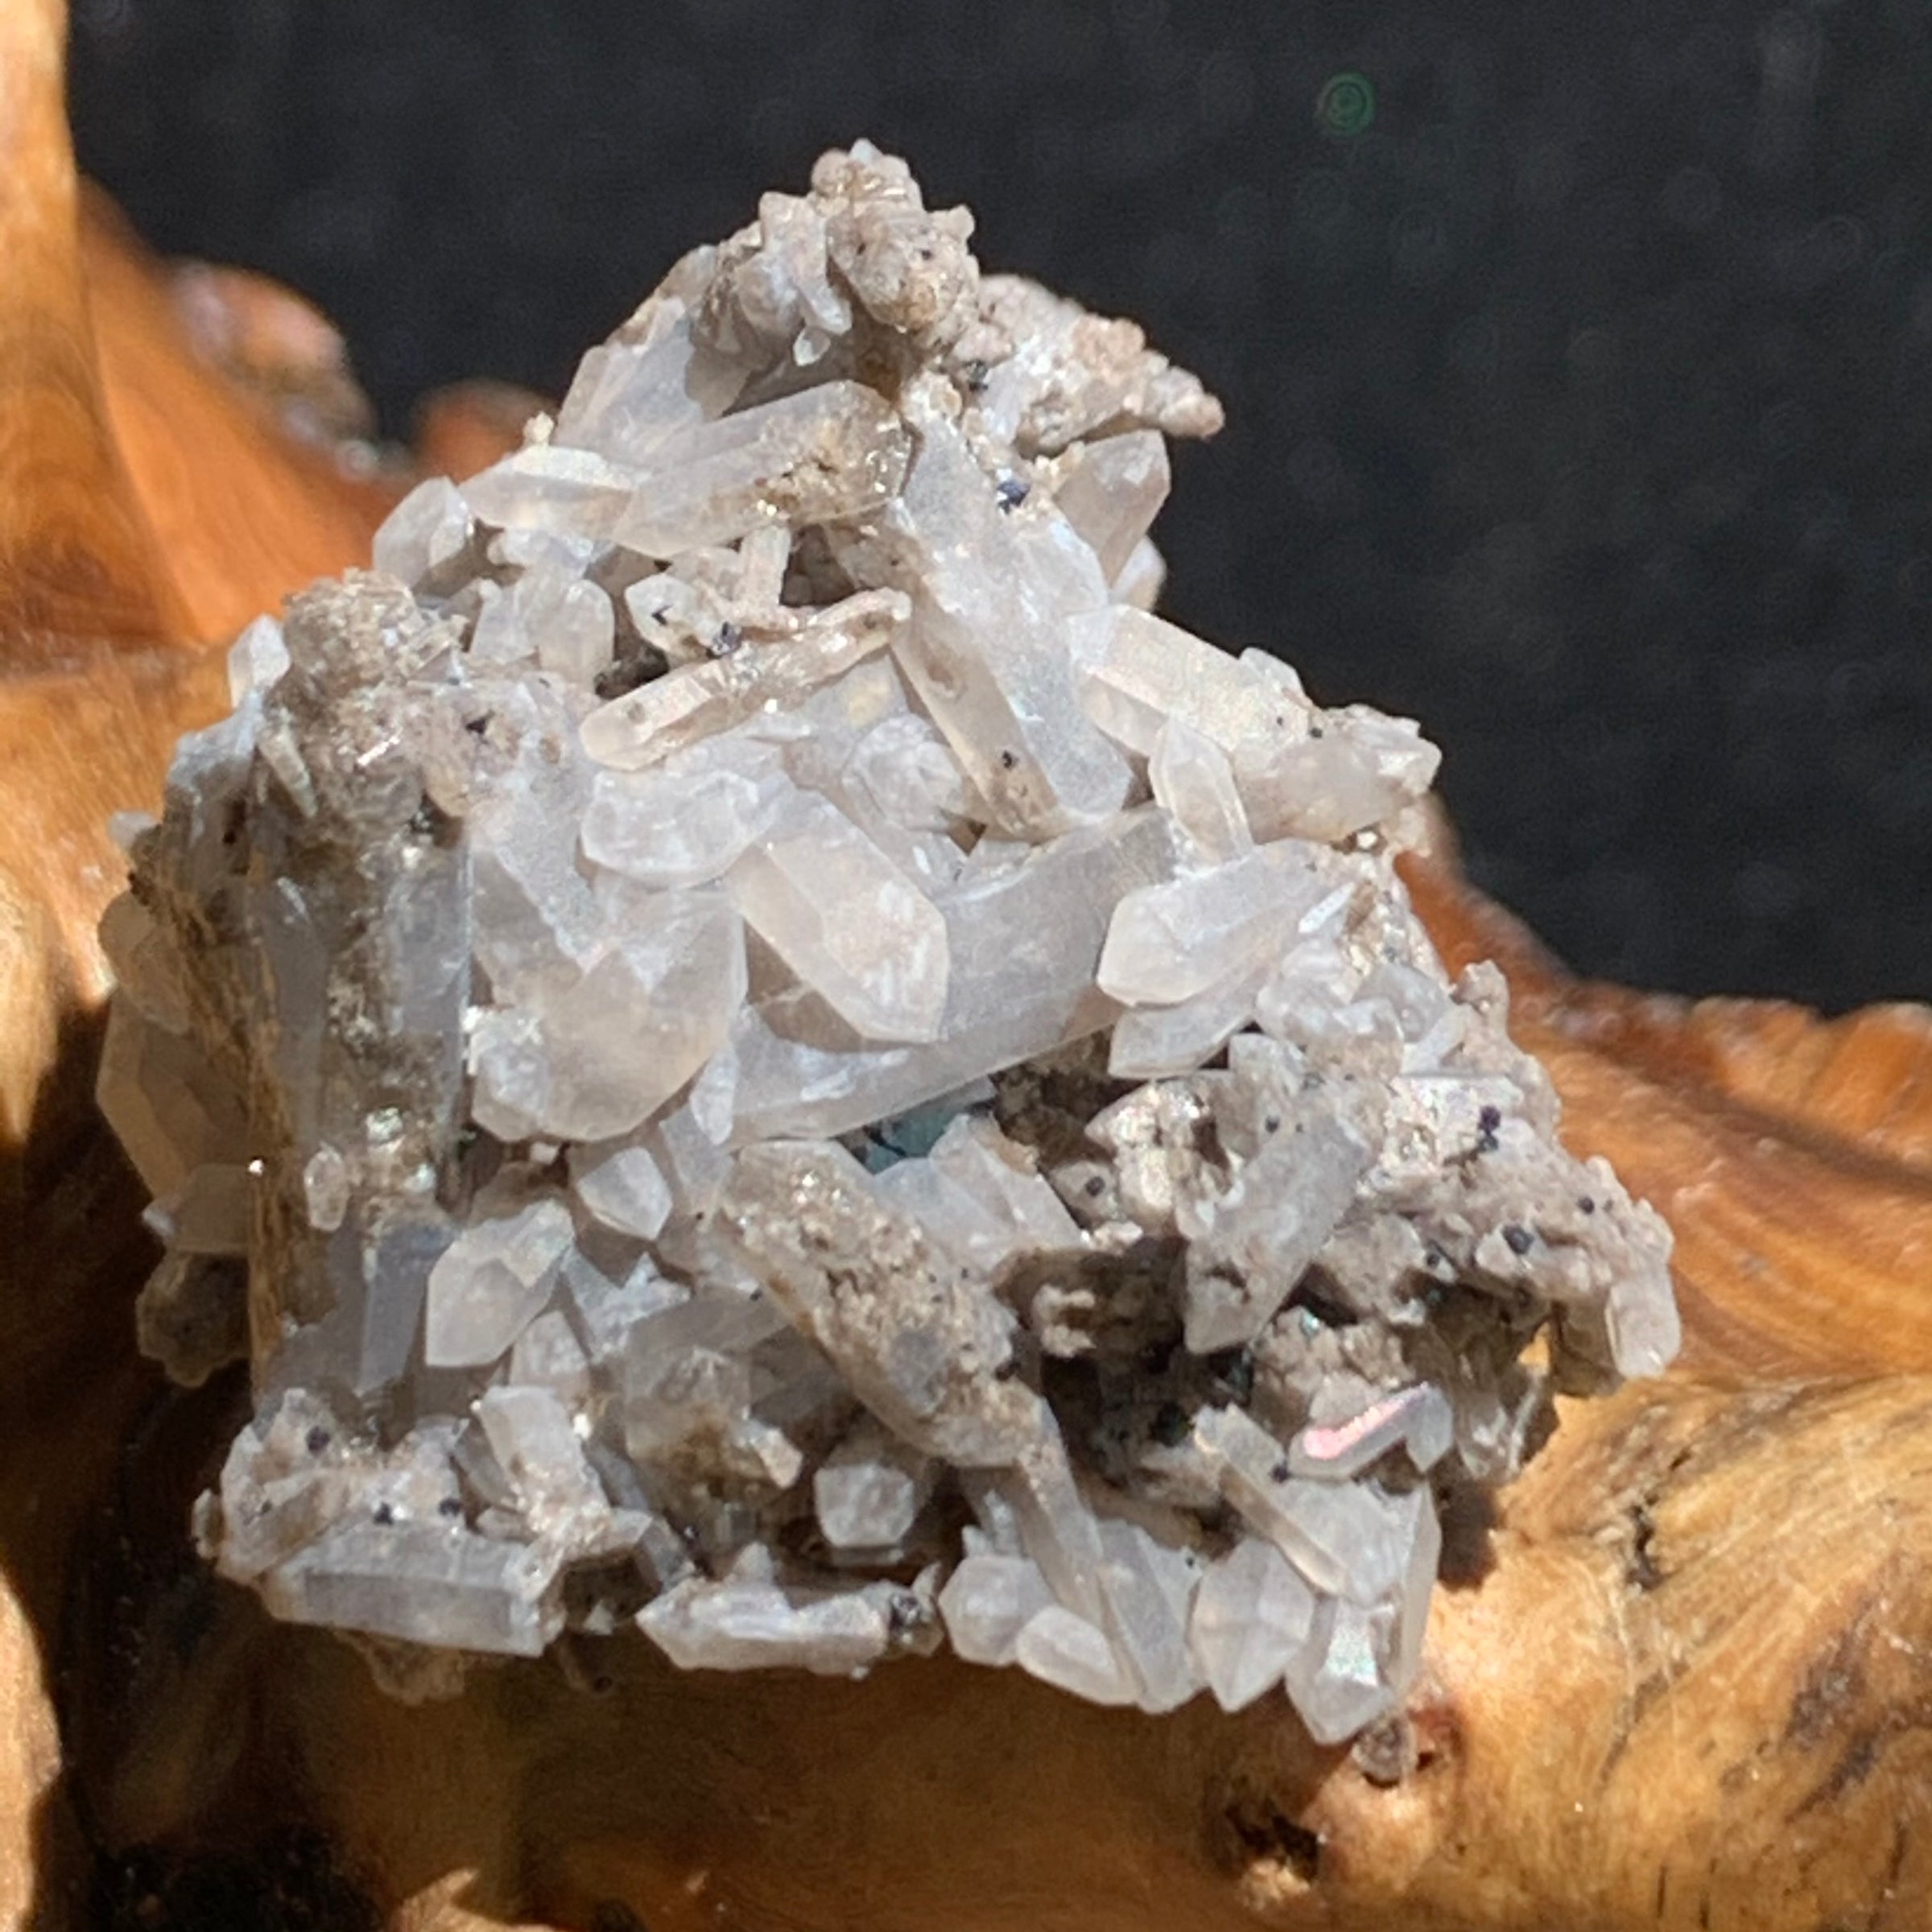 tiny brookite crystals on a smokey quartz cluster sitting on driftwood for display